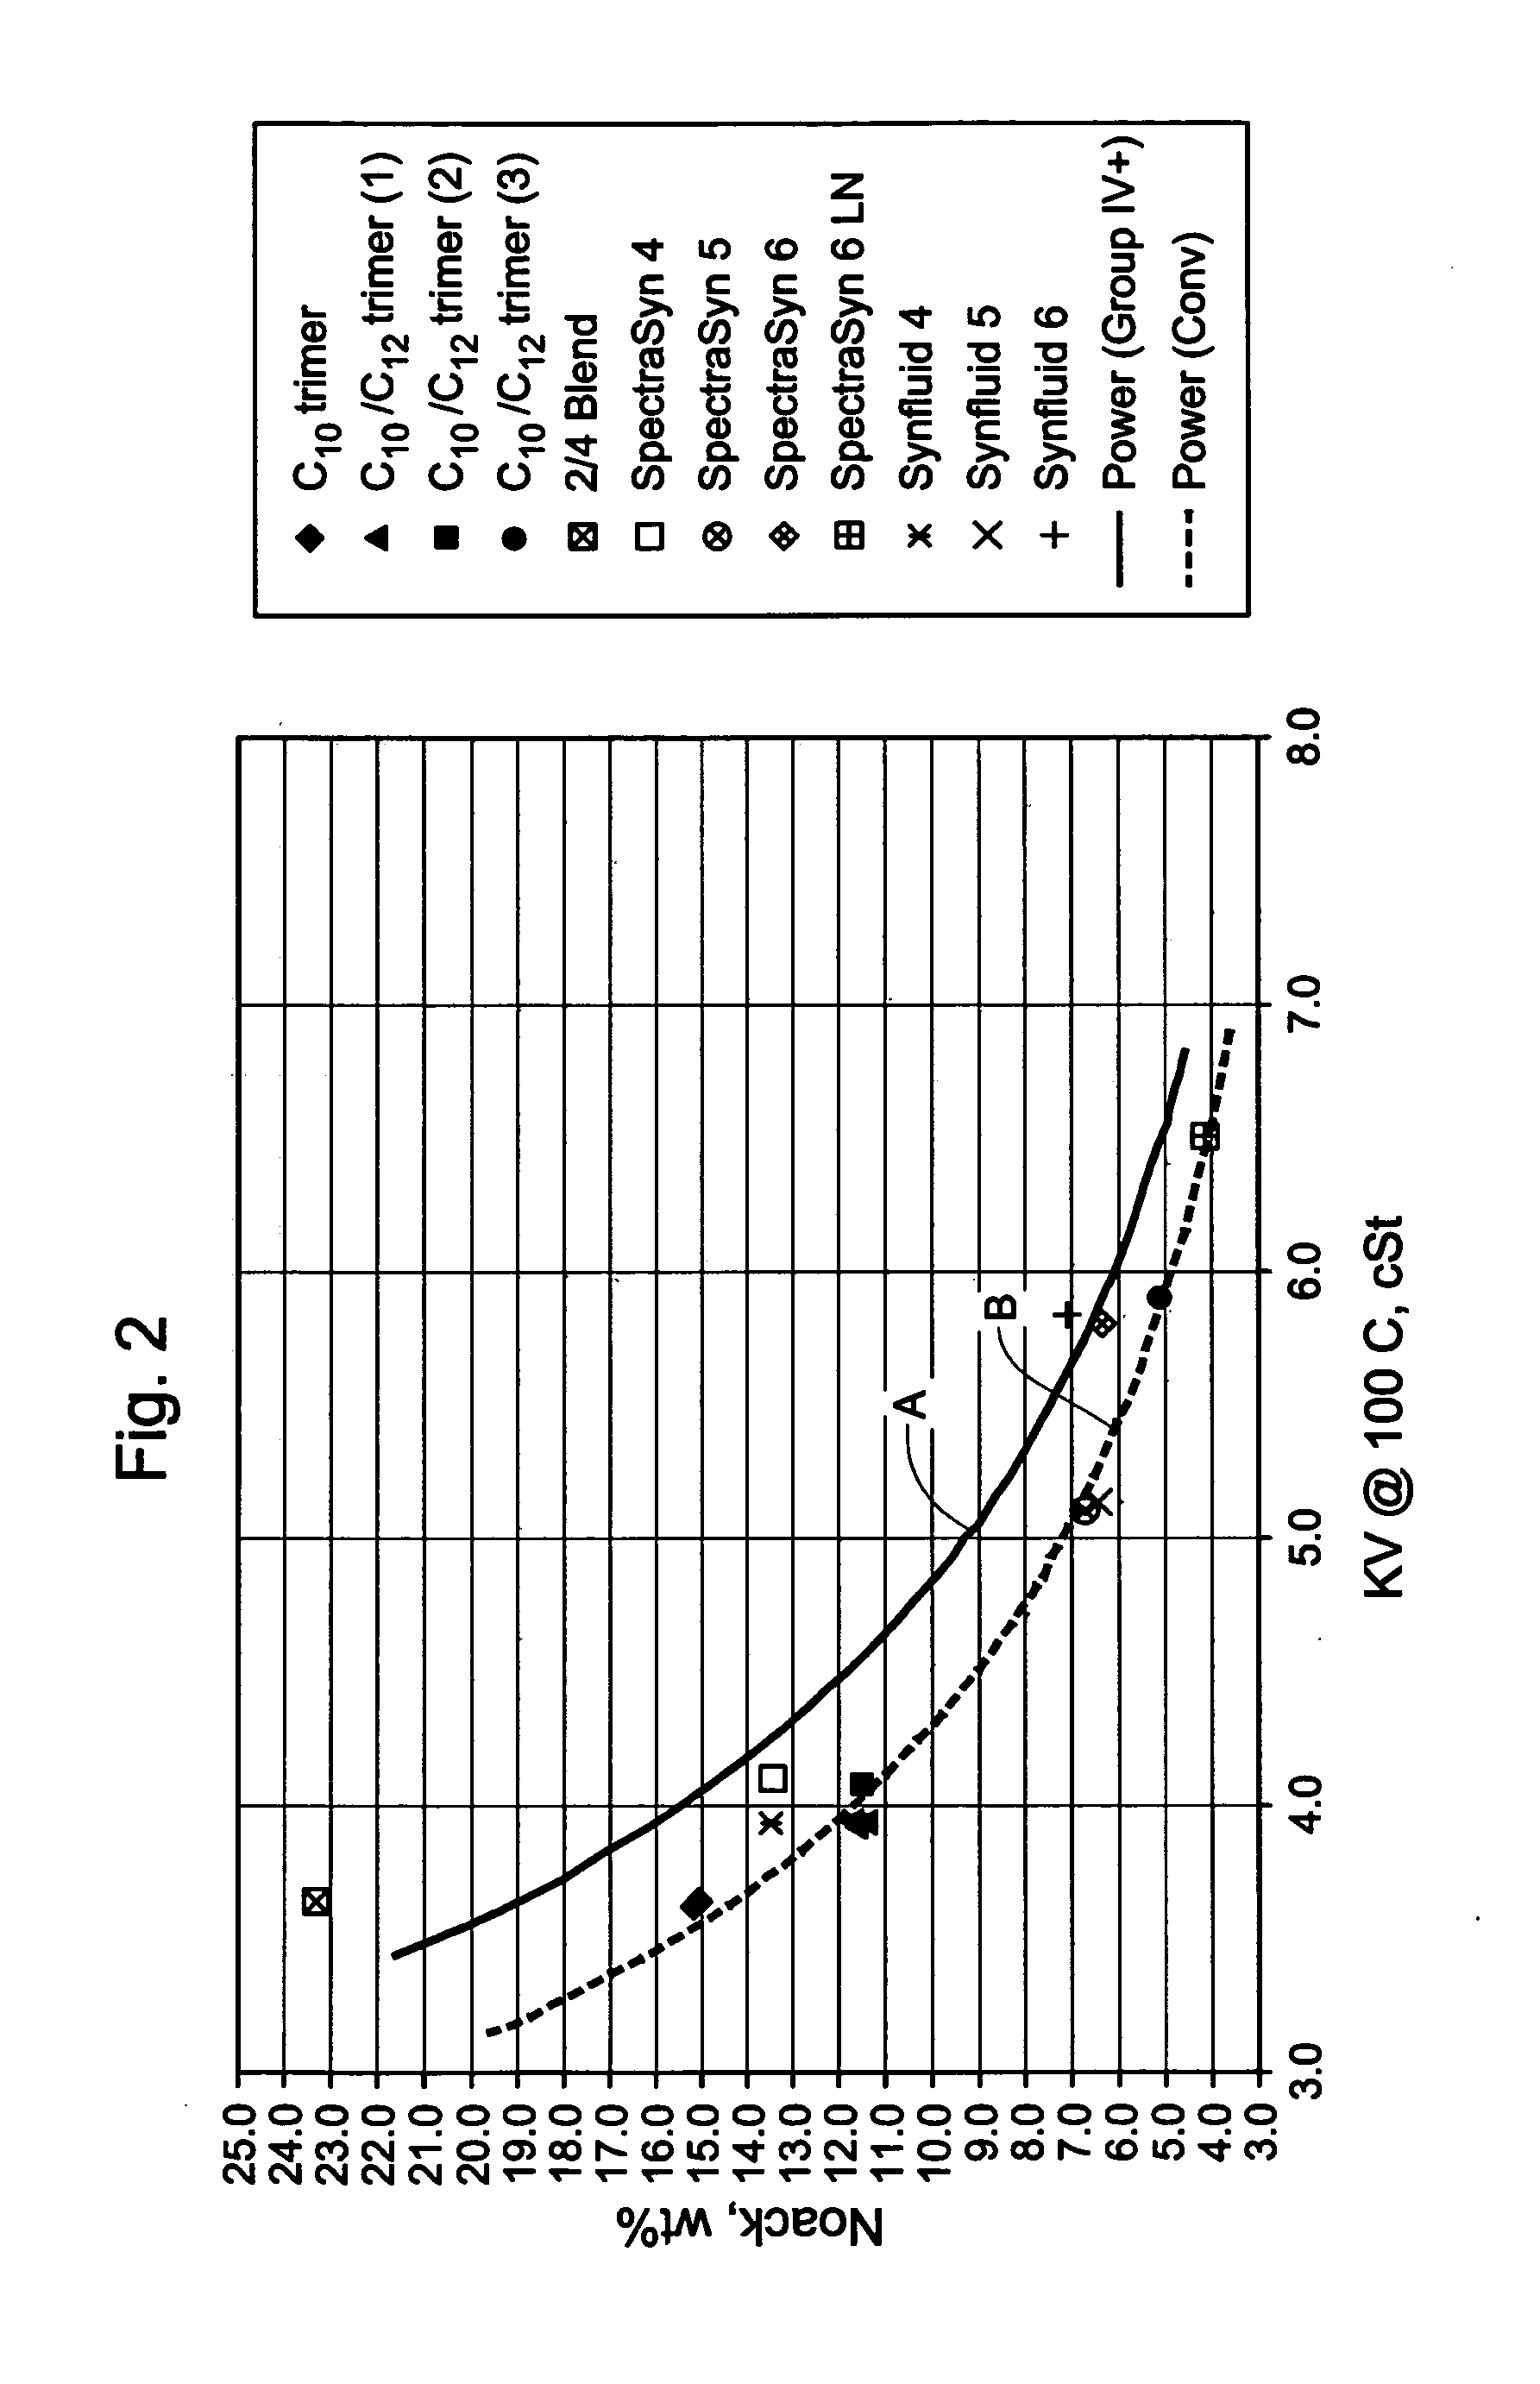 Blend comprising group II and group IV basestocks